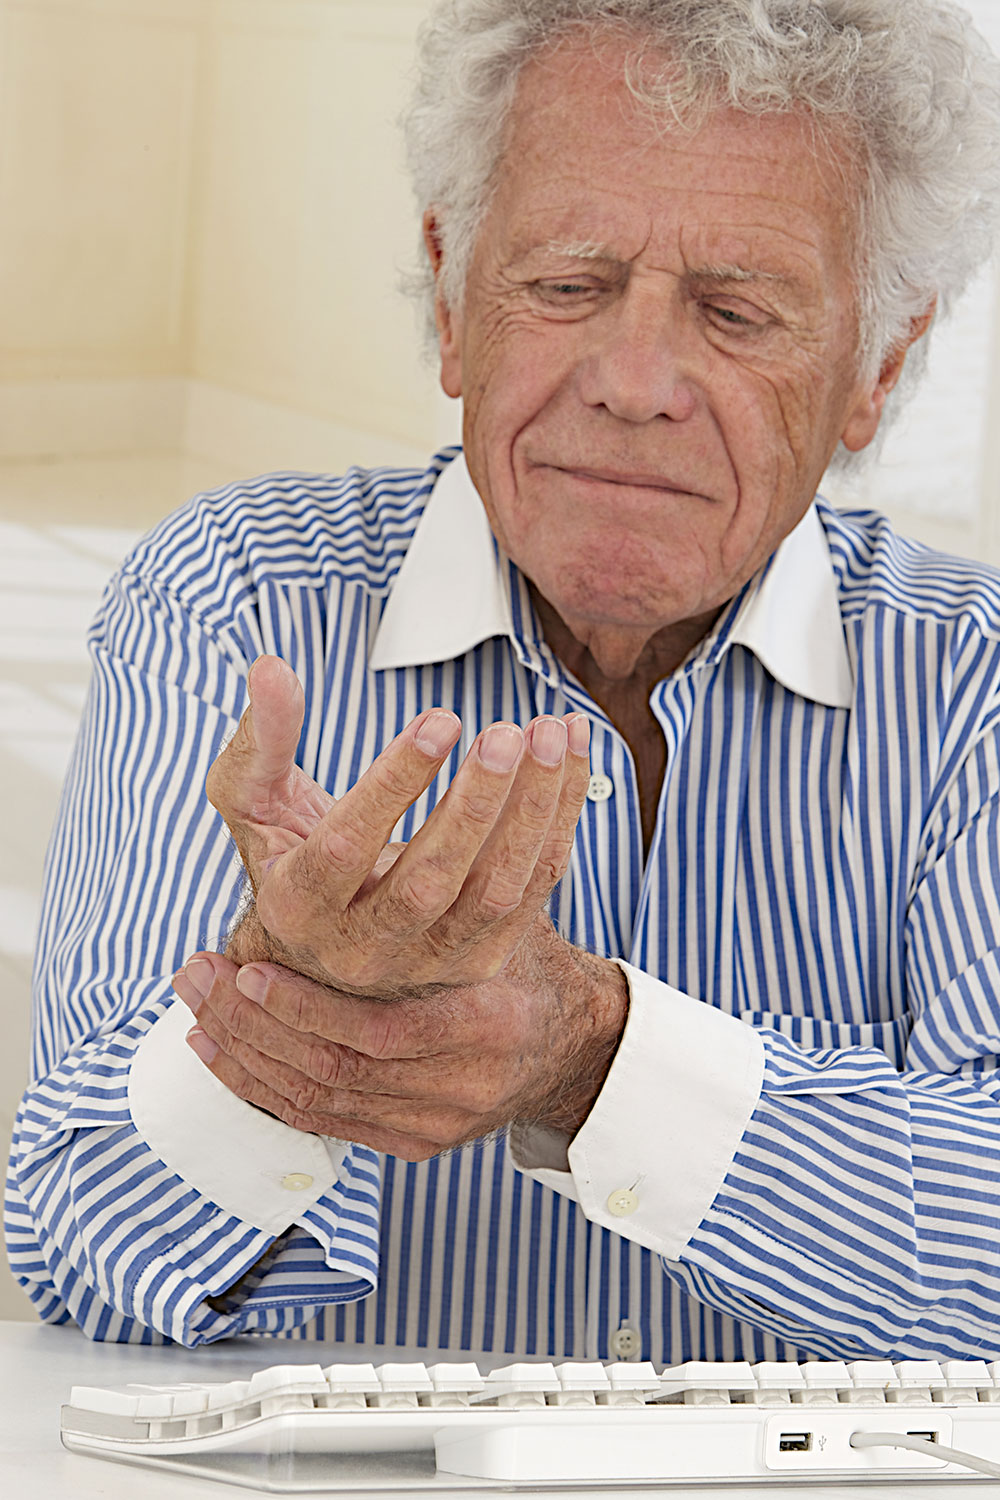 old man with Arthritis and carpal tunnel